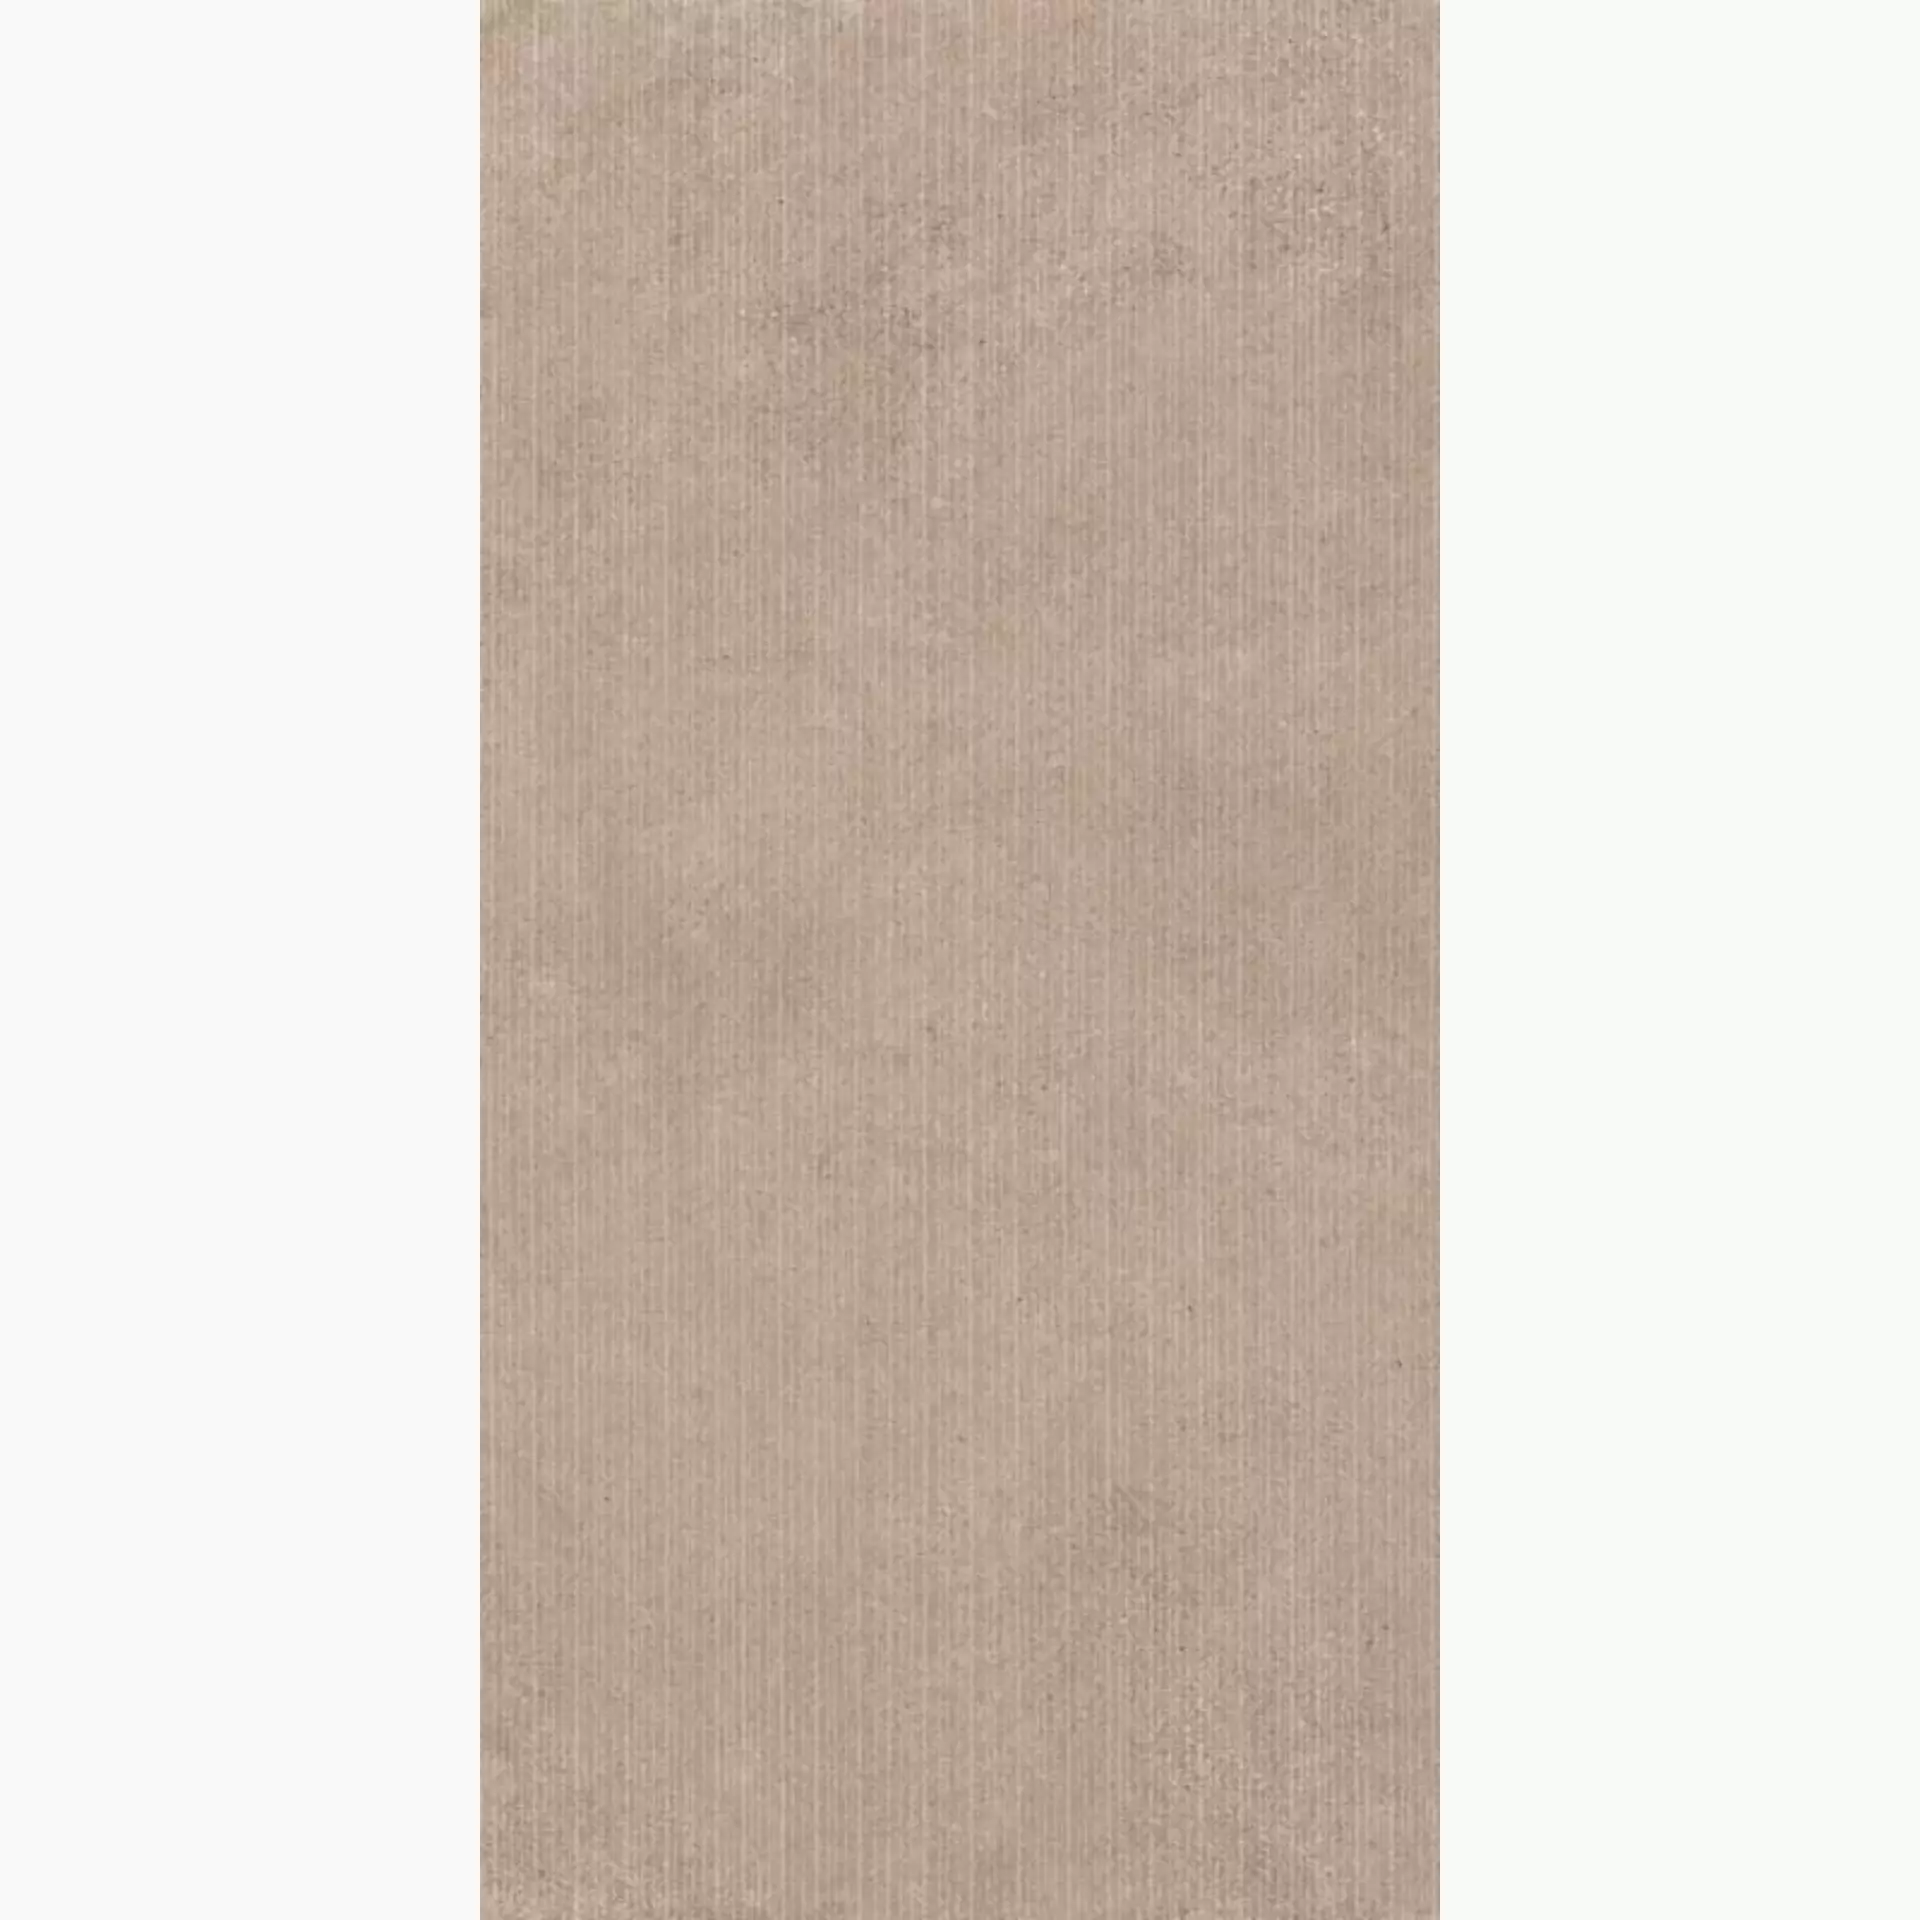 Sant Agostino Silkystone Taupe Rigato CSASKSRT60 60x120cm rectified 10mm